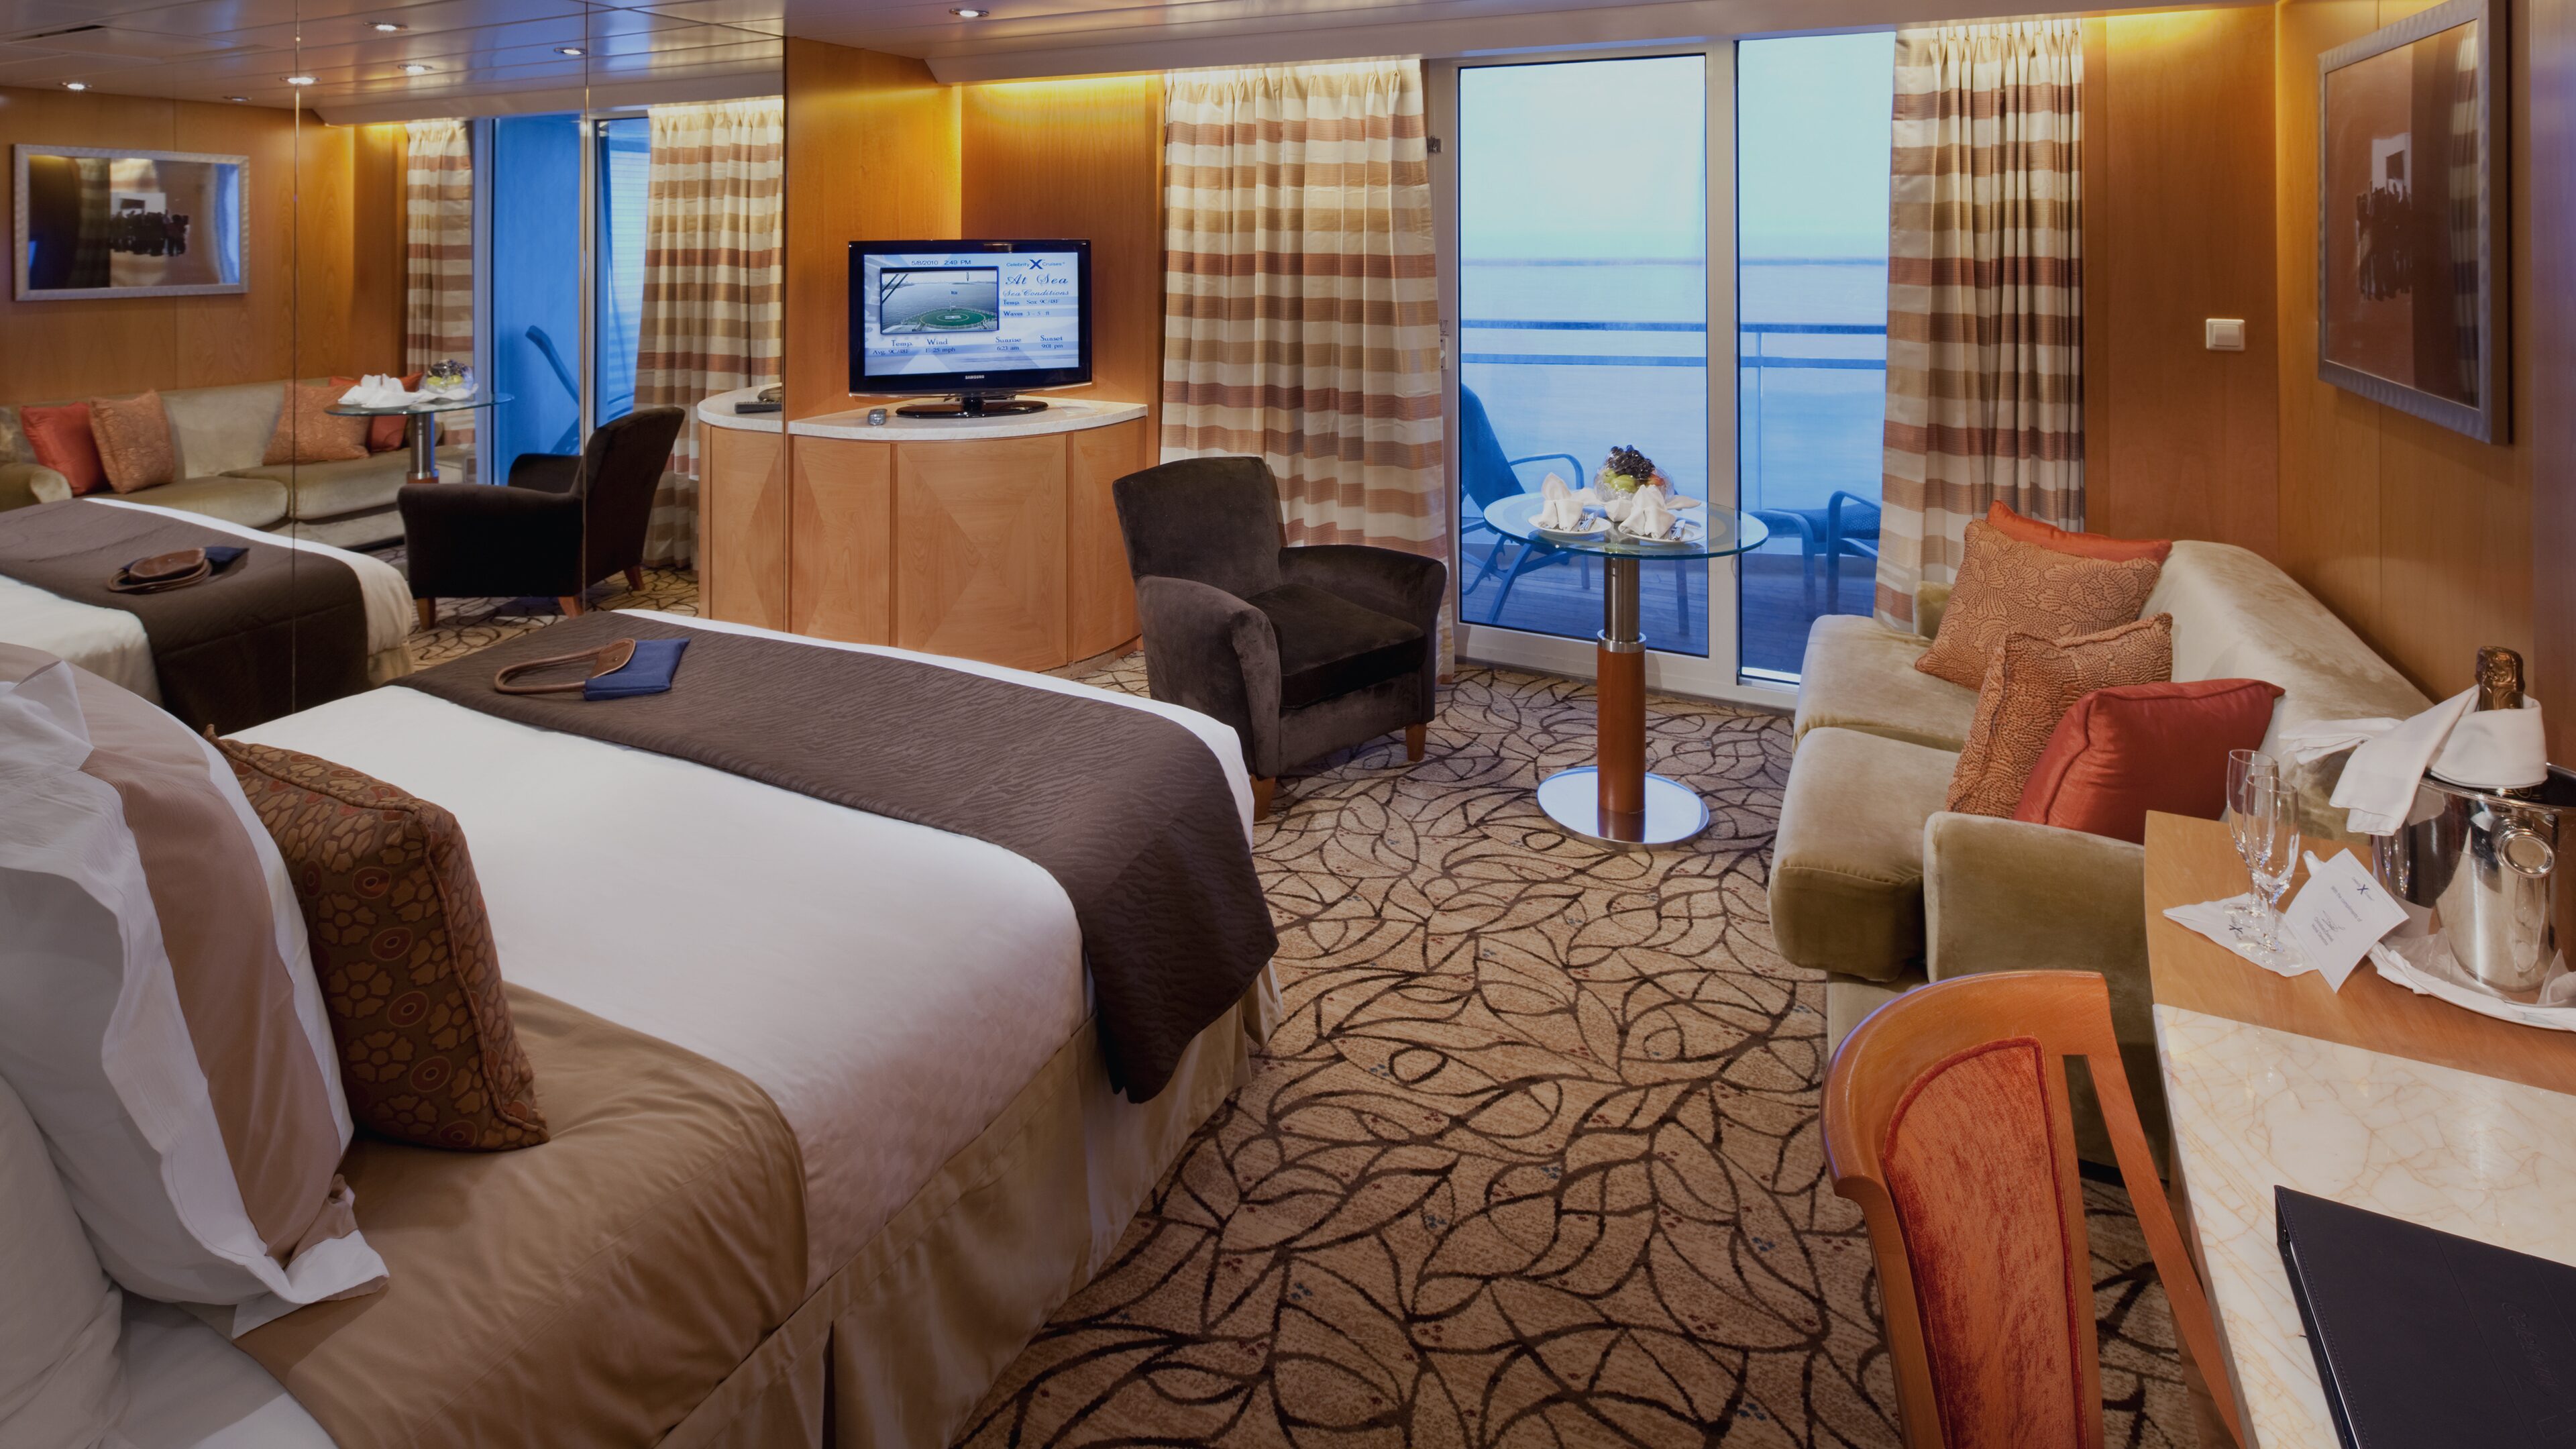 celebrity cruise lines hotels